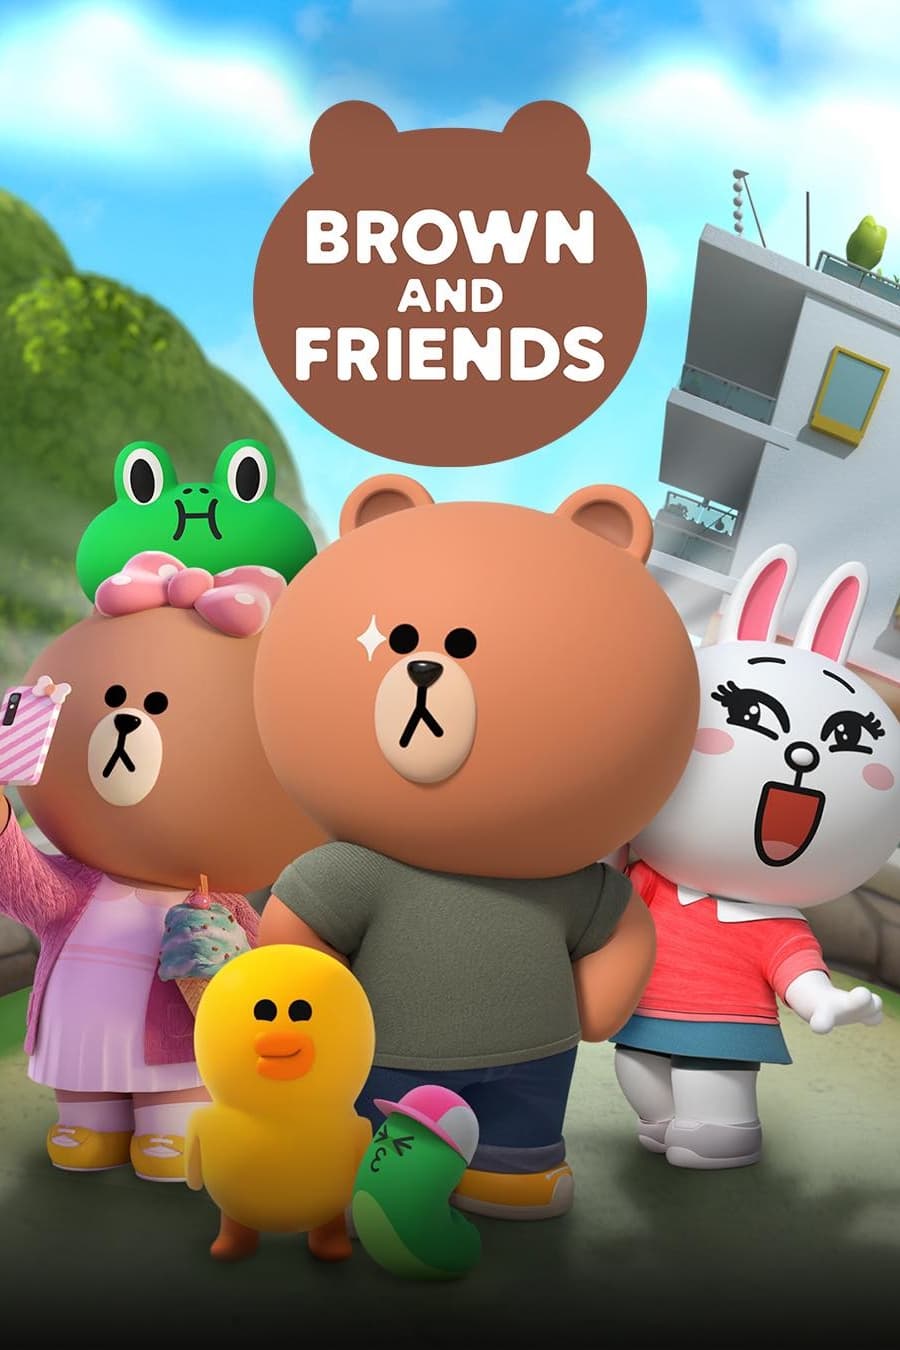 Brown and Friends TV Shows About Friendship